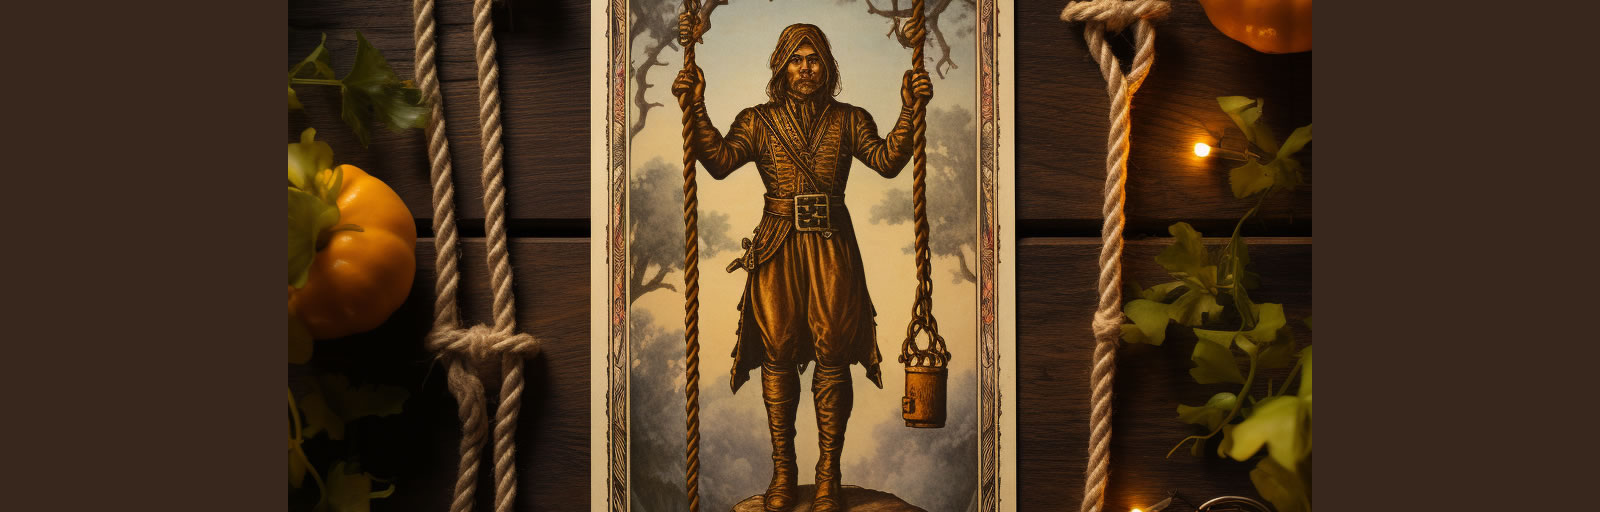 Featured image for “The Hanged Man Tarot Card”